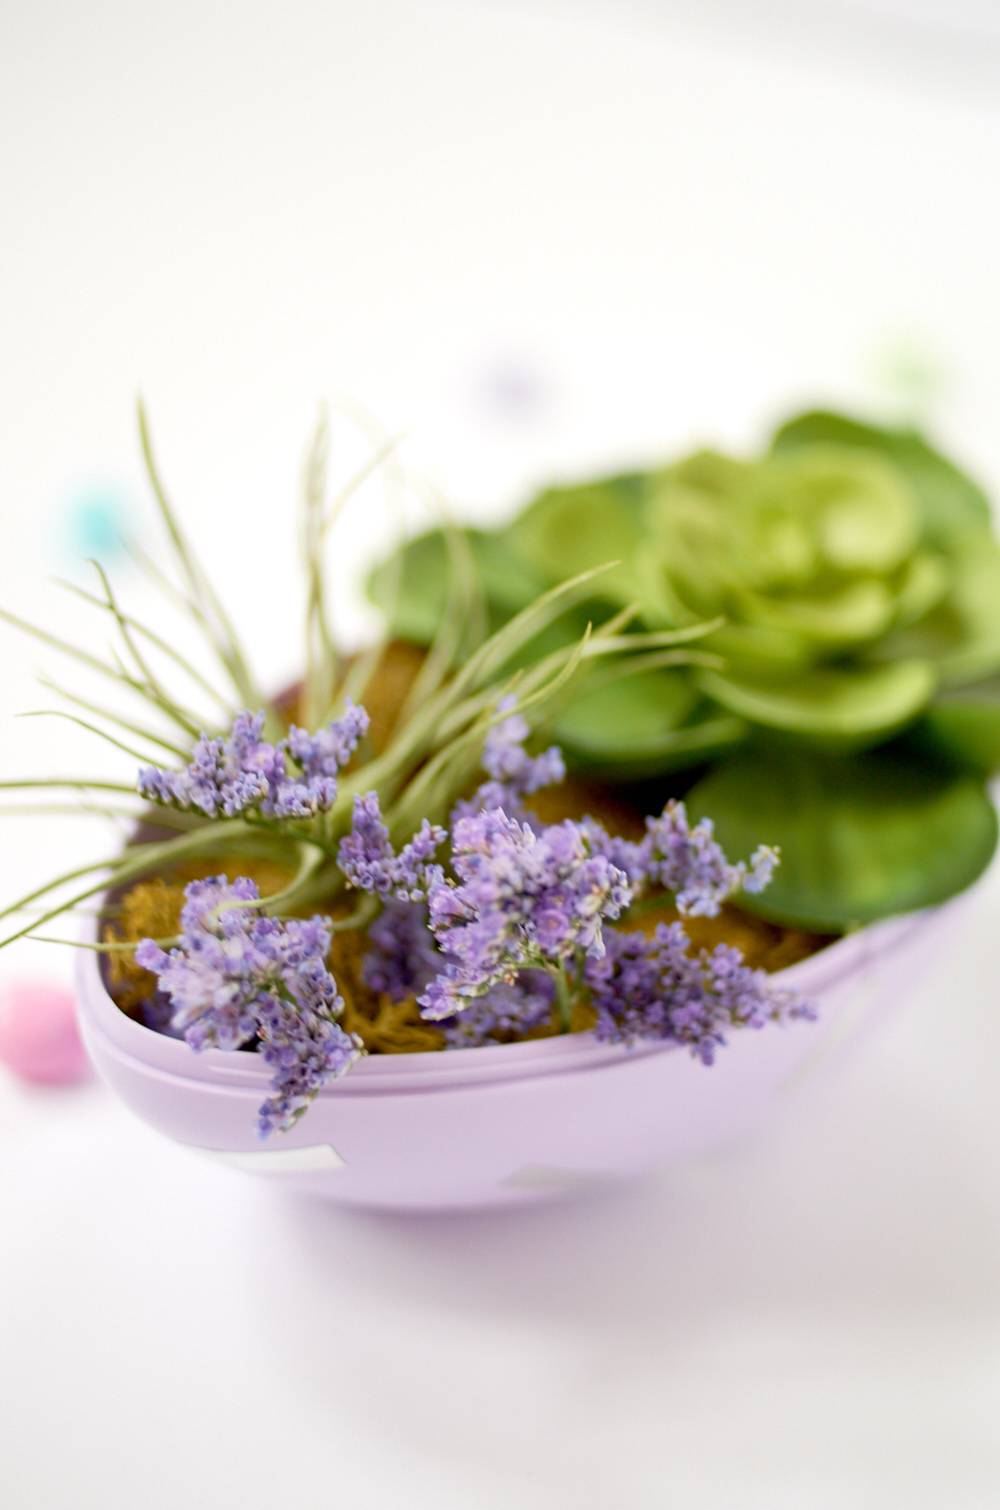 A bowl has purple flowers and green food in it.